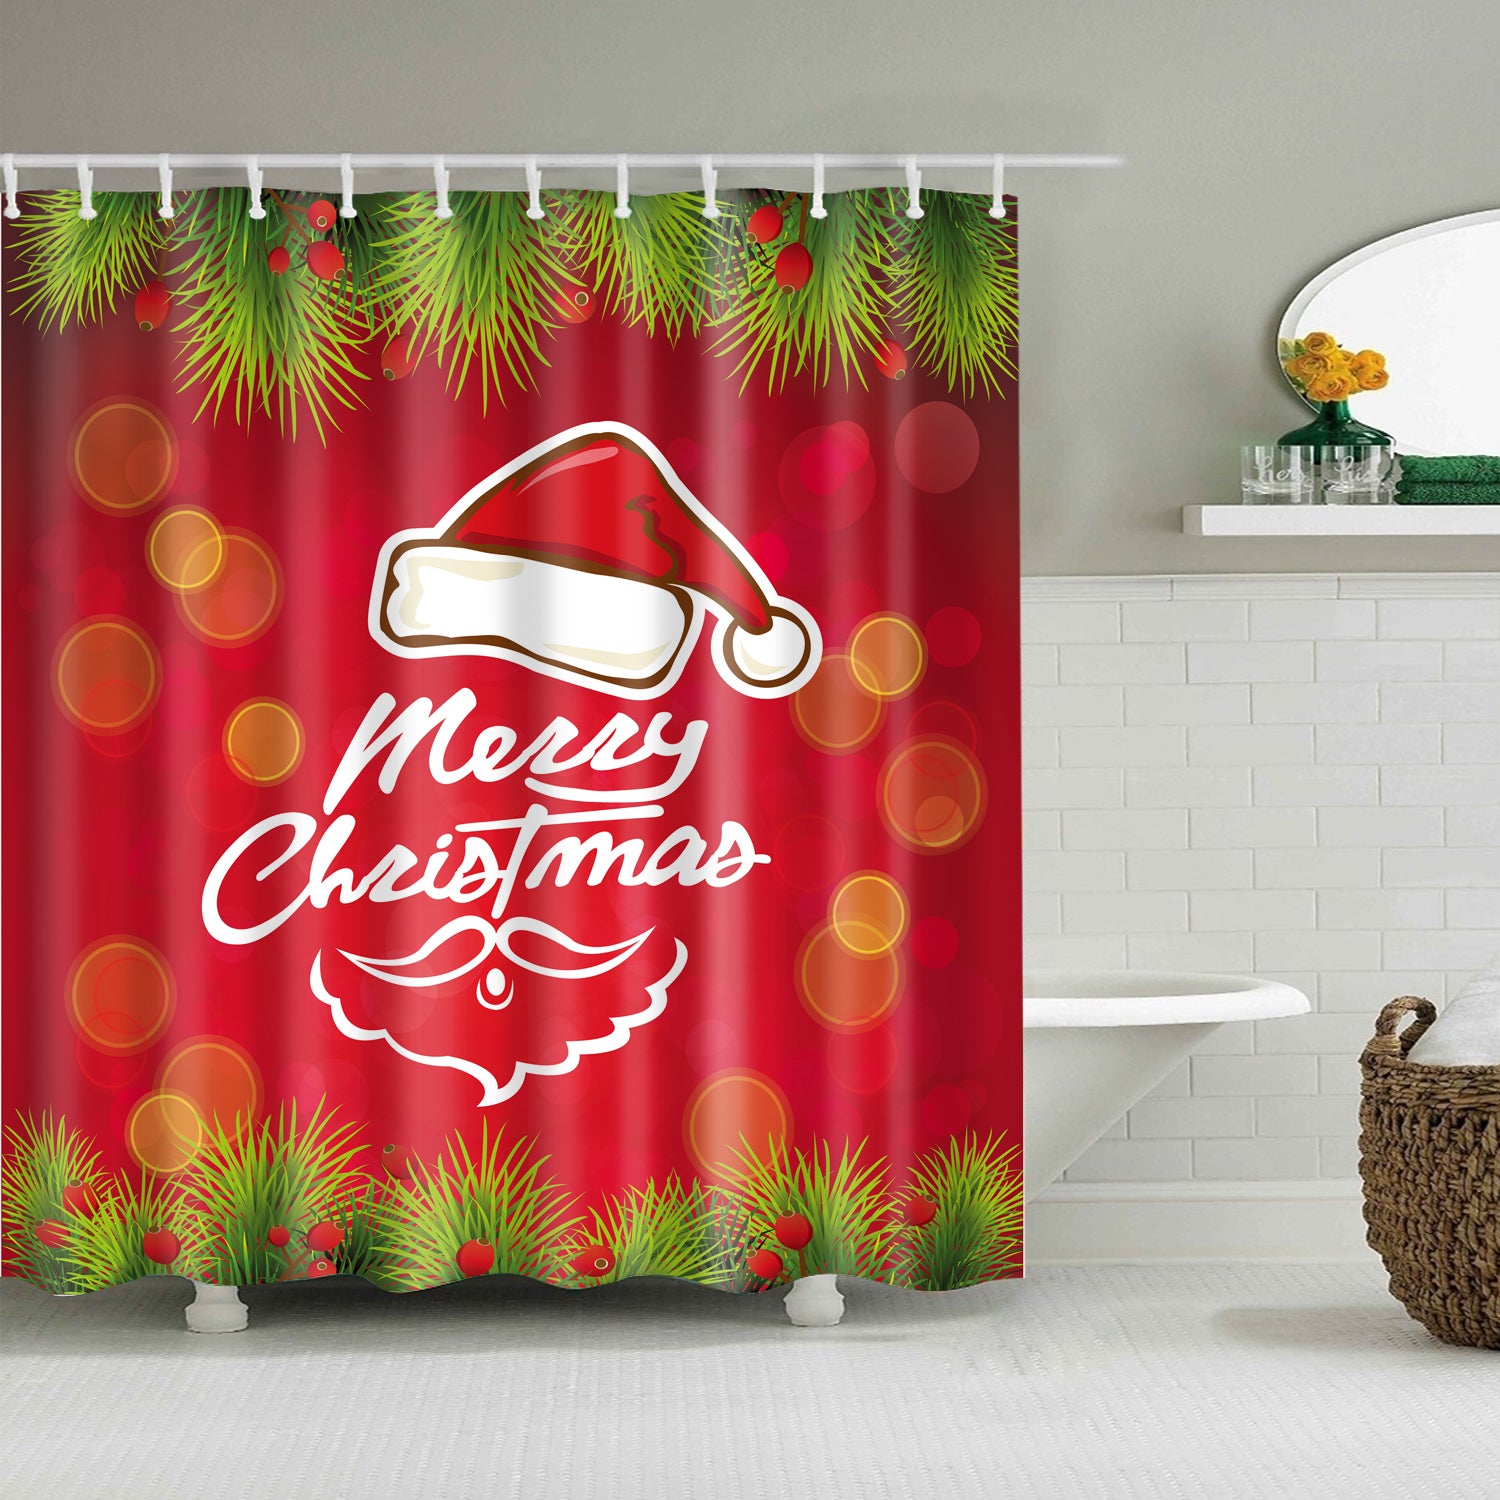 Red and Green Backdrop Christmas Quotes Shower Curtain | GoJeek